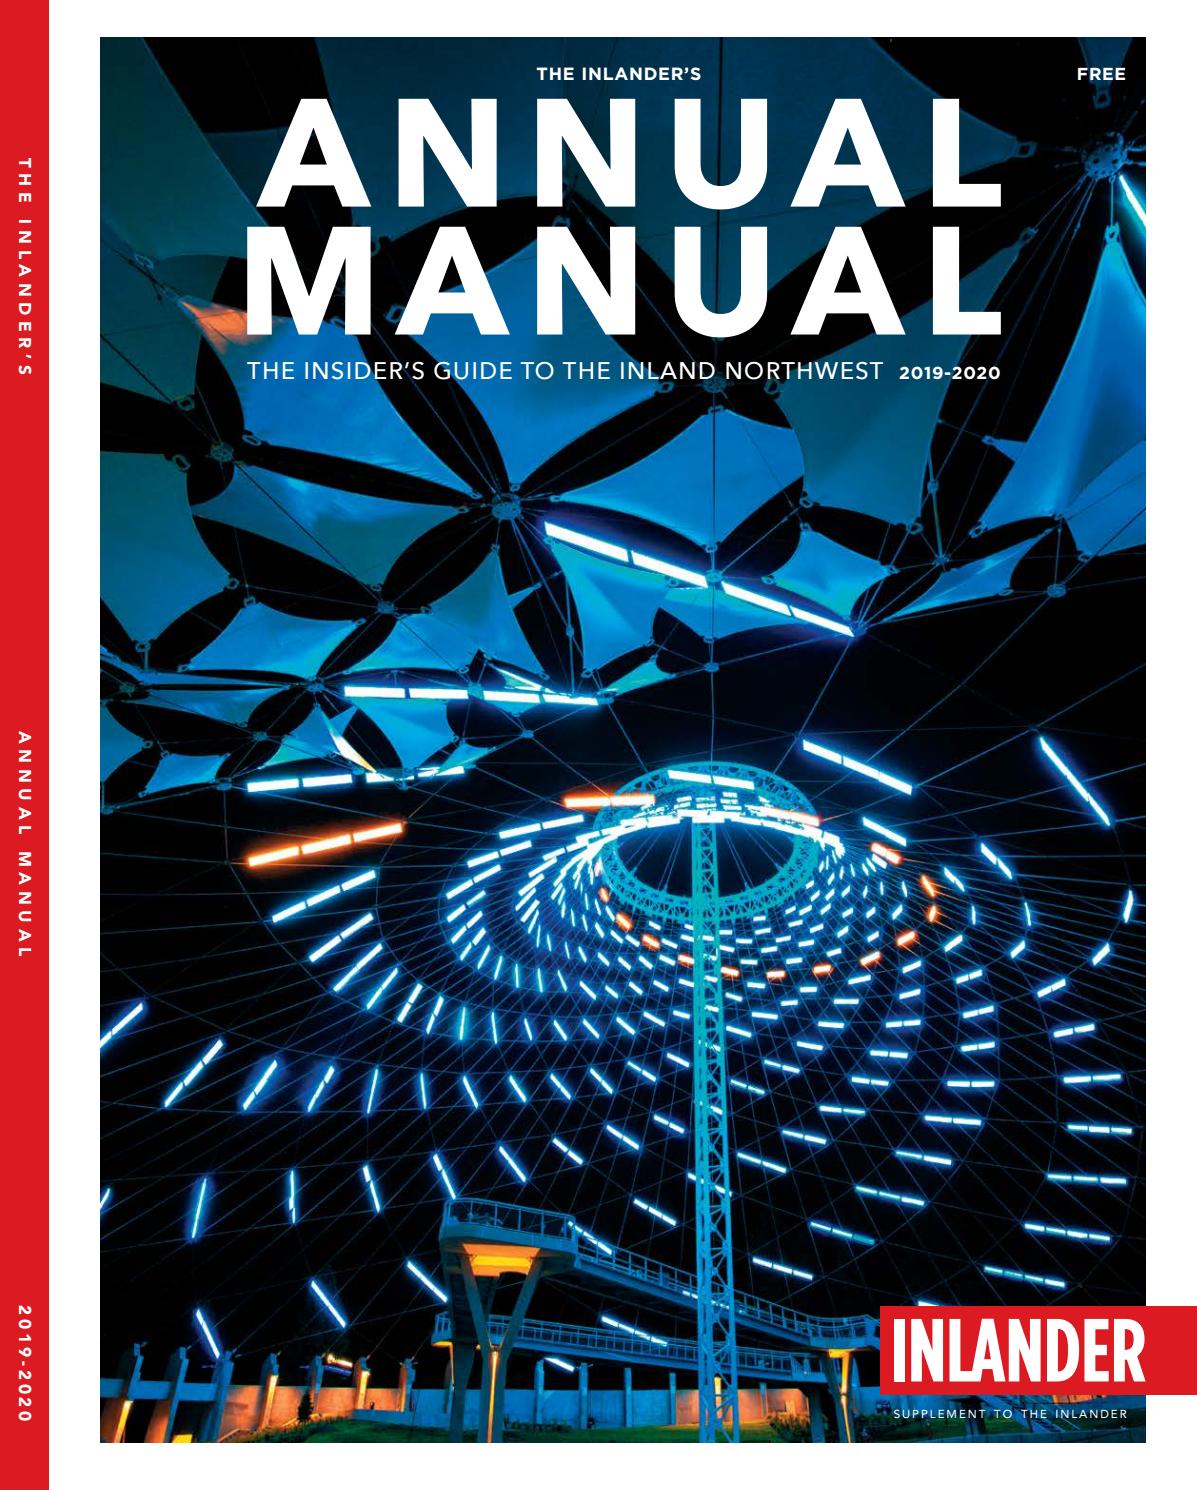 Twin Star Electric Fireplace Troubleshooting Best Of Annual Manual 2019 20 by the Inlander issuu